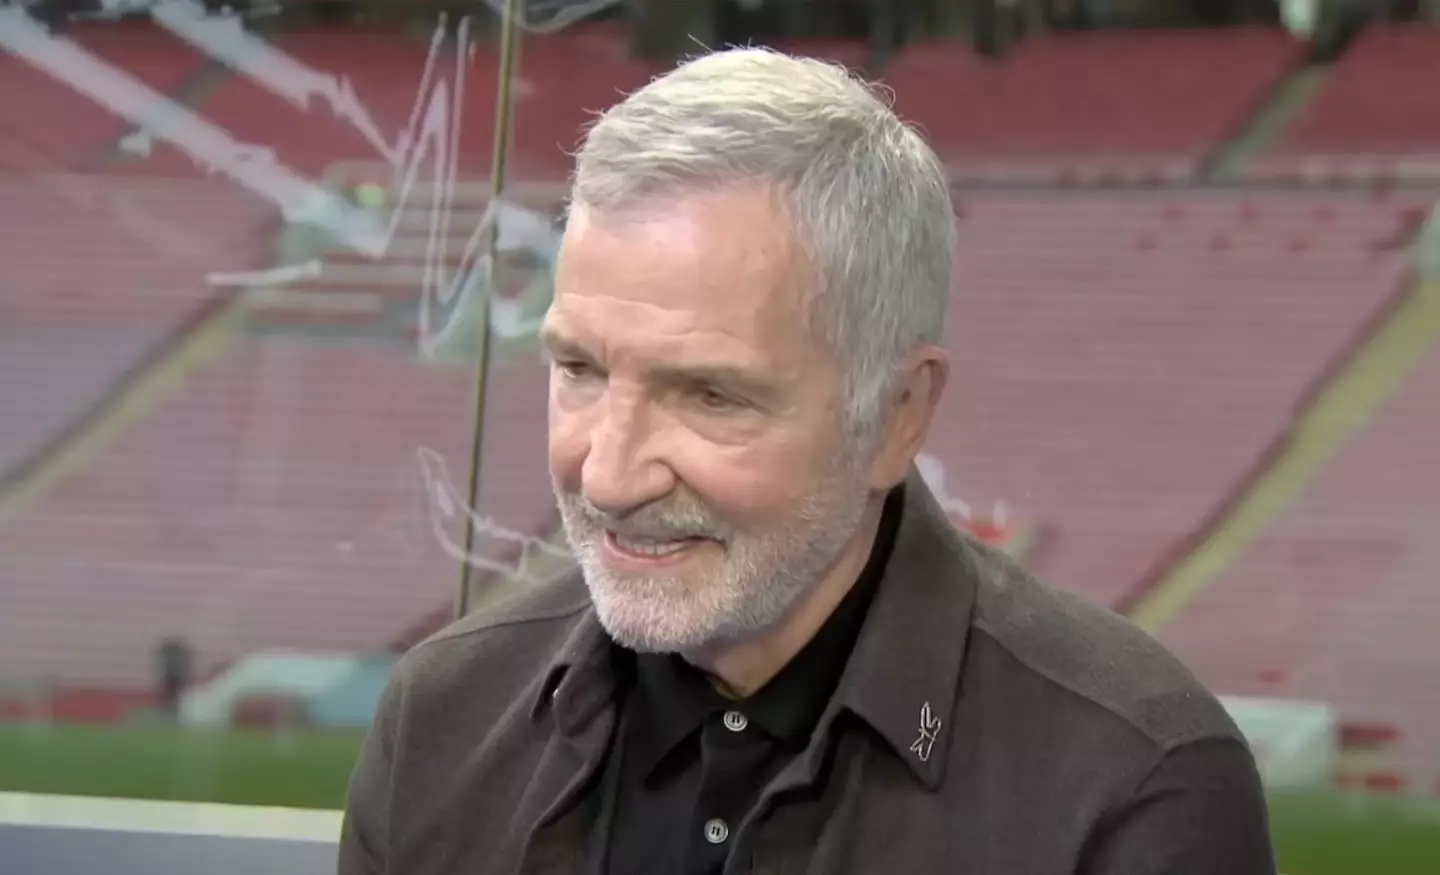 An emotional Graeme Souness was 'on the verge of tears' after announcing live on-air that he would be leaving Sky.